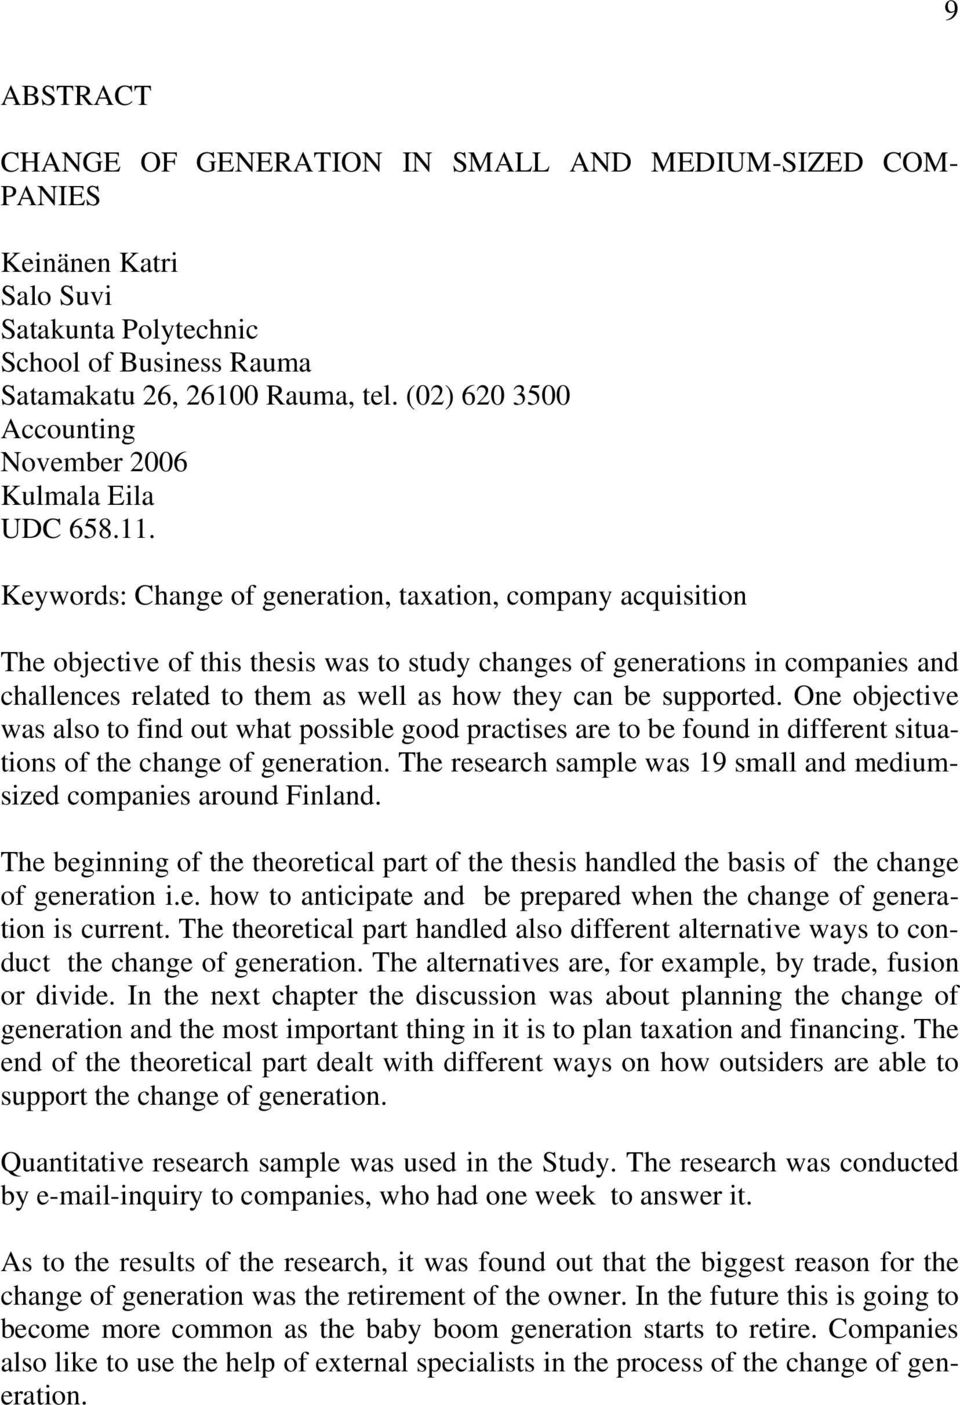 Keywords: Change of generation, taxation, company acquisition The objective of this thesis was to study changes of generations in companies and challences related to them as well as how they can be